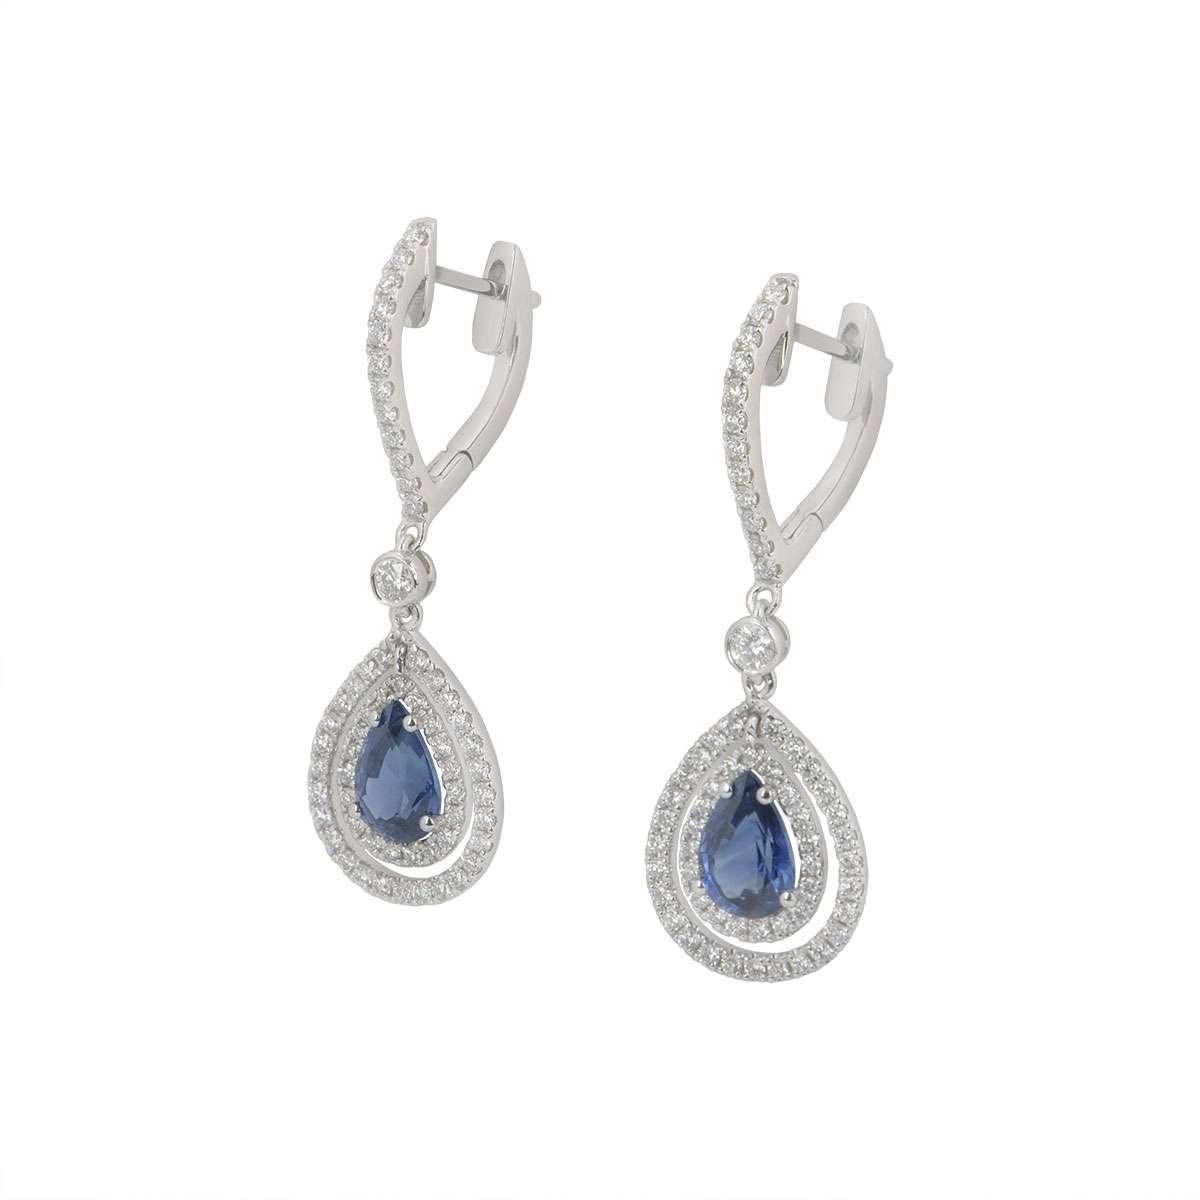 A pair of 18k white gold sapphire and diamond earrings. The earrings feature a pear cut sapphire in a prong setting with 118 pave set round brilliant cut diamonds around it. The pear cut sapphires have a total weight of 1.63ct and the pave set